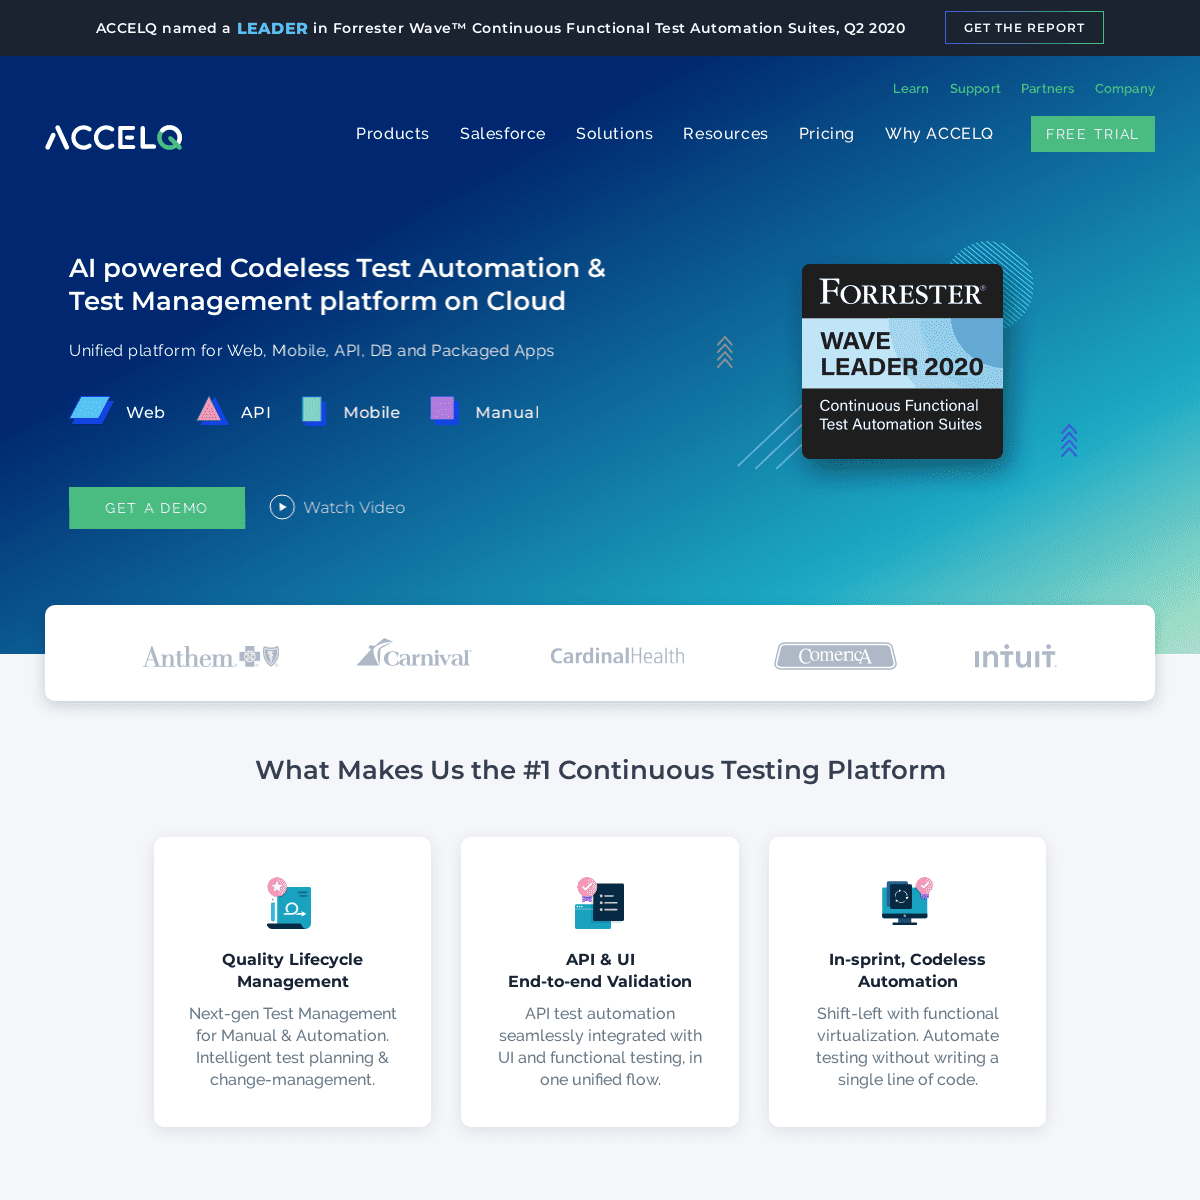 A complete backup of https://accelq.com